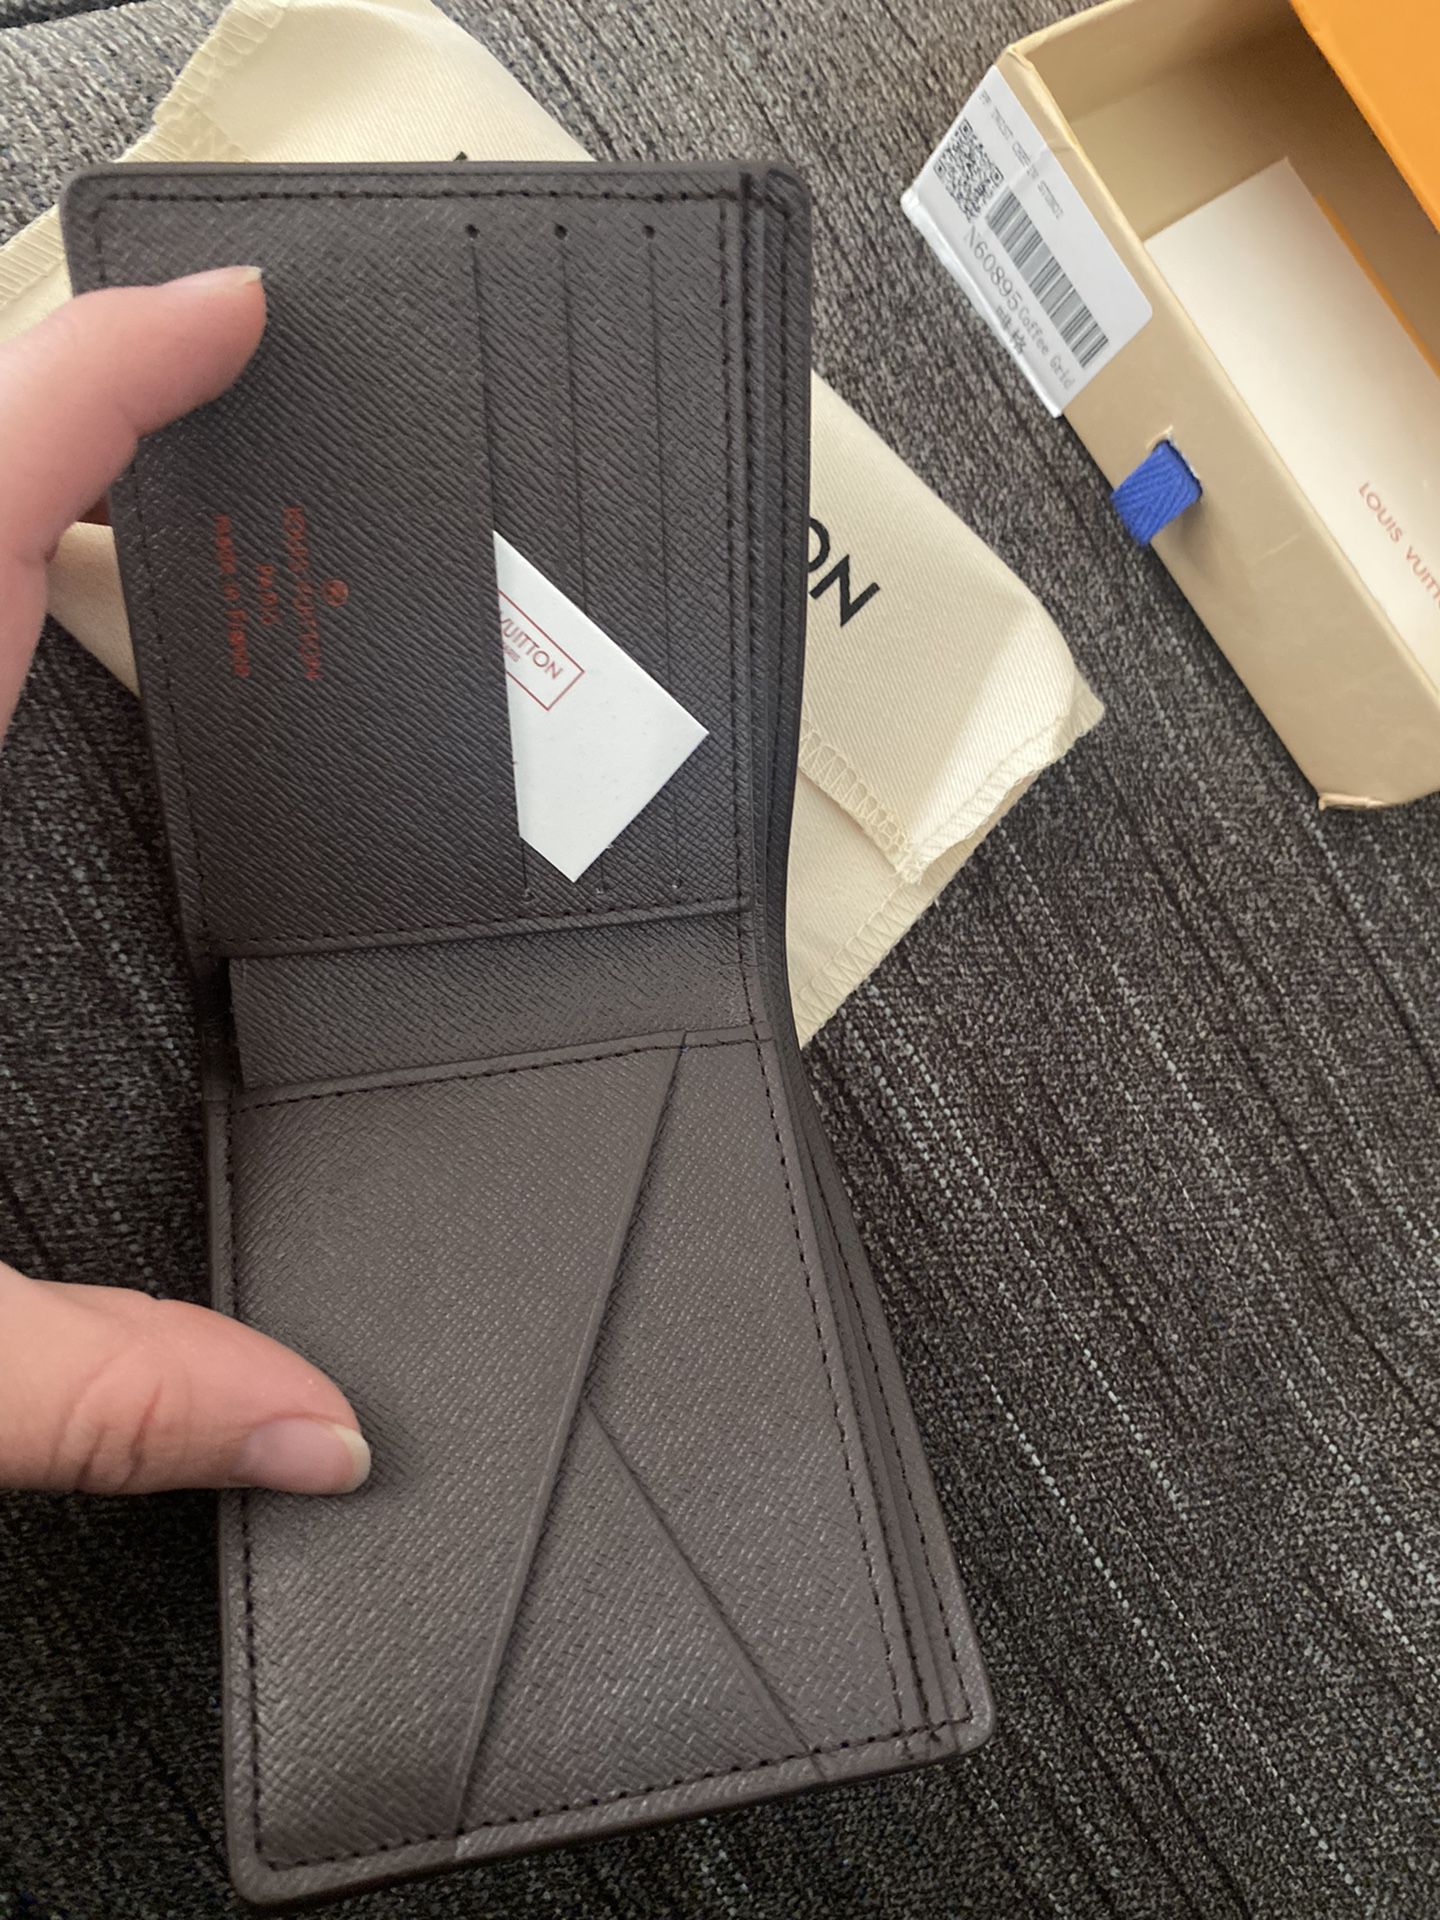 Louis Vuitton “Old Flower” Wallet For Men for Sale in Holly, MI - OfferUp